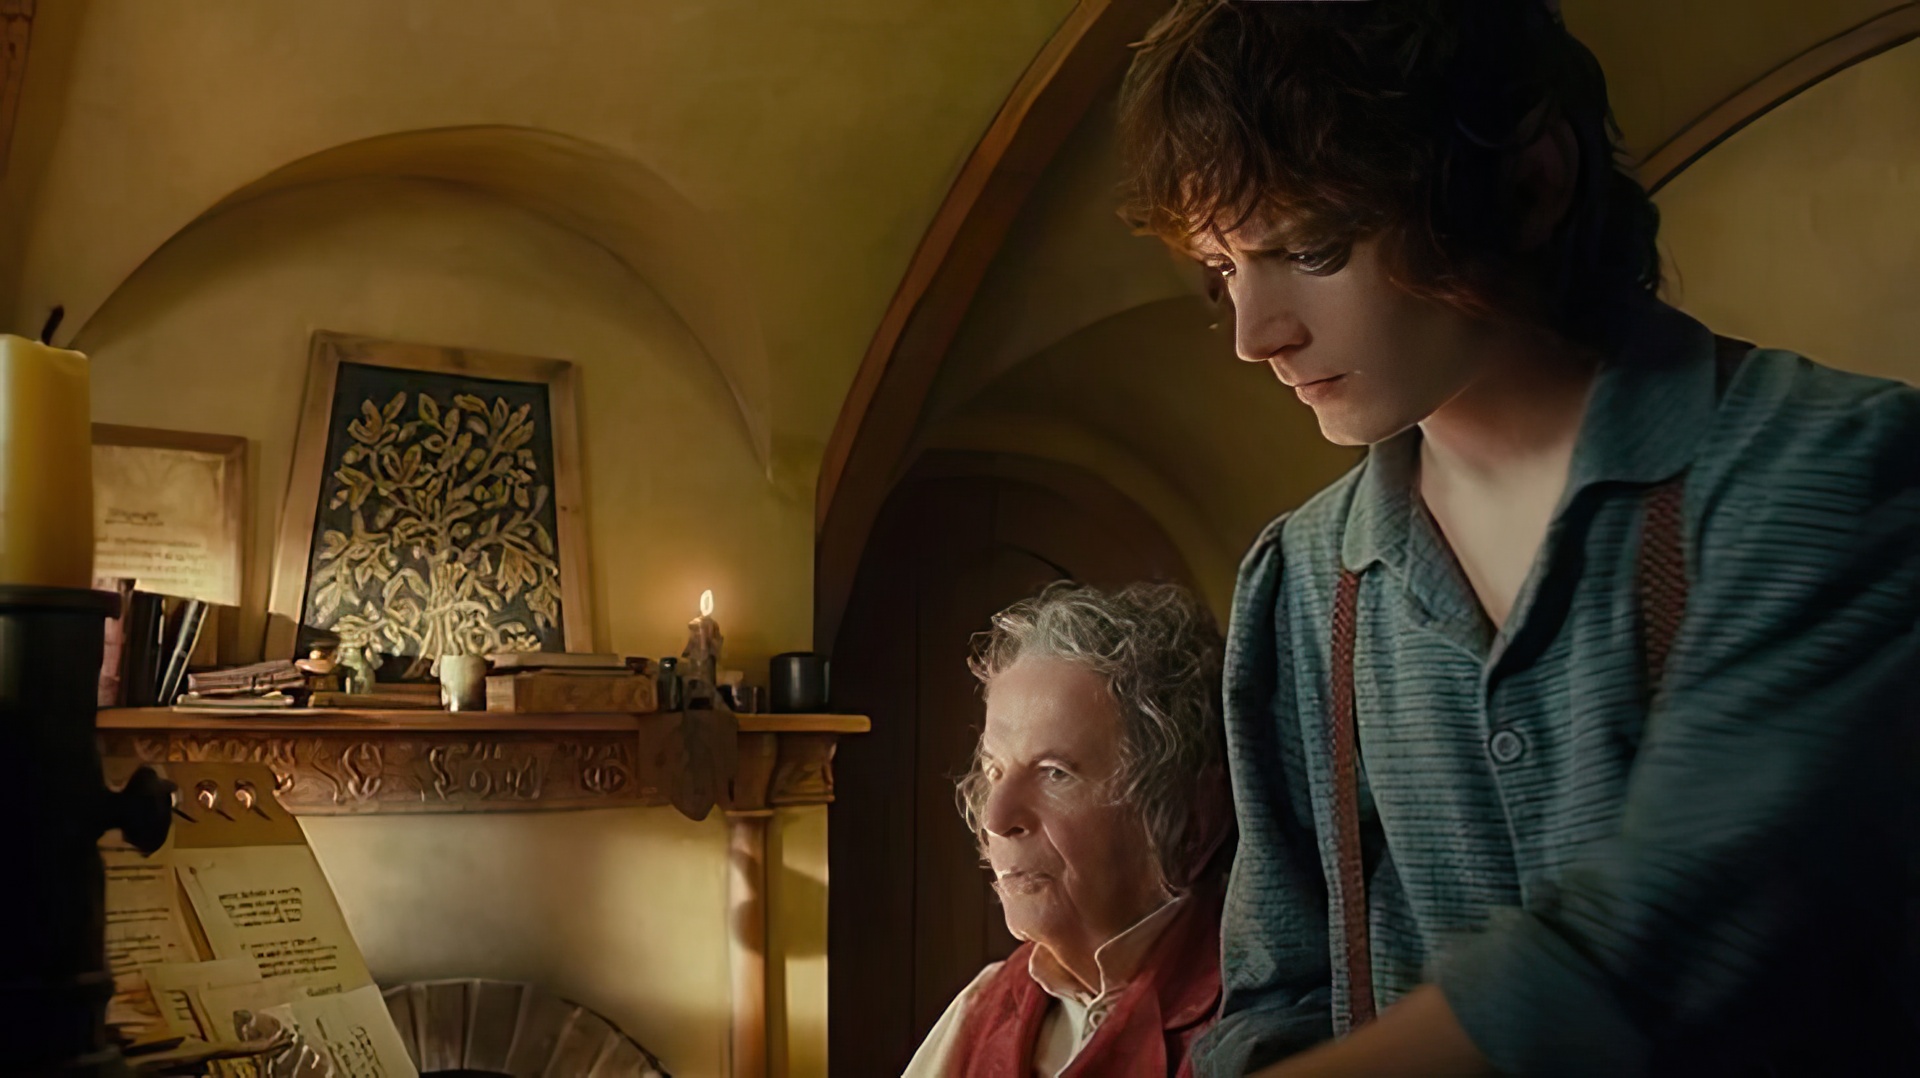 Ian Holm and Elijah Wood in 'The Hobbit: An Unexpected Journey'